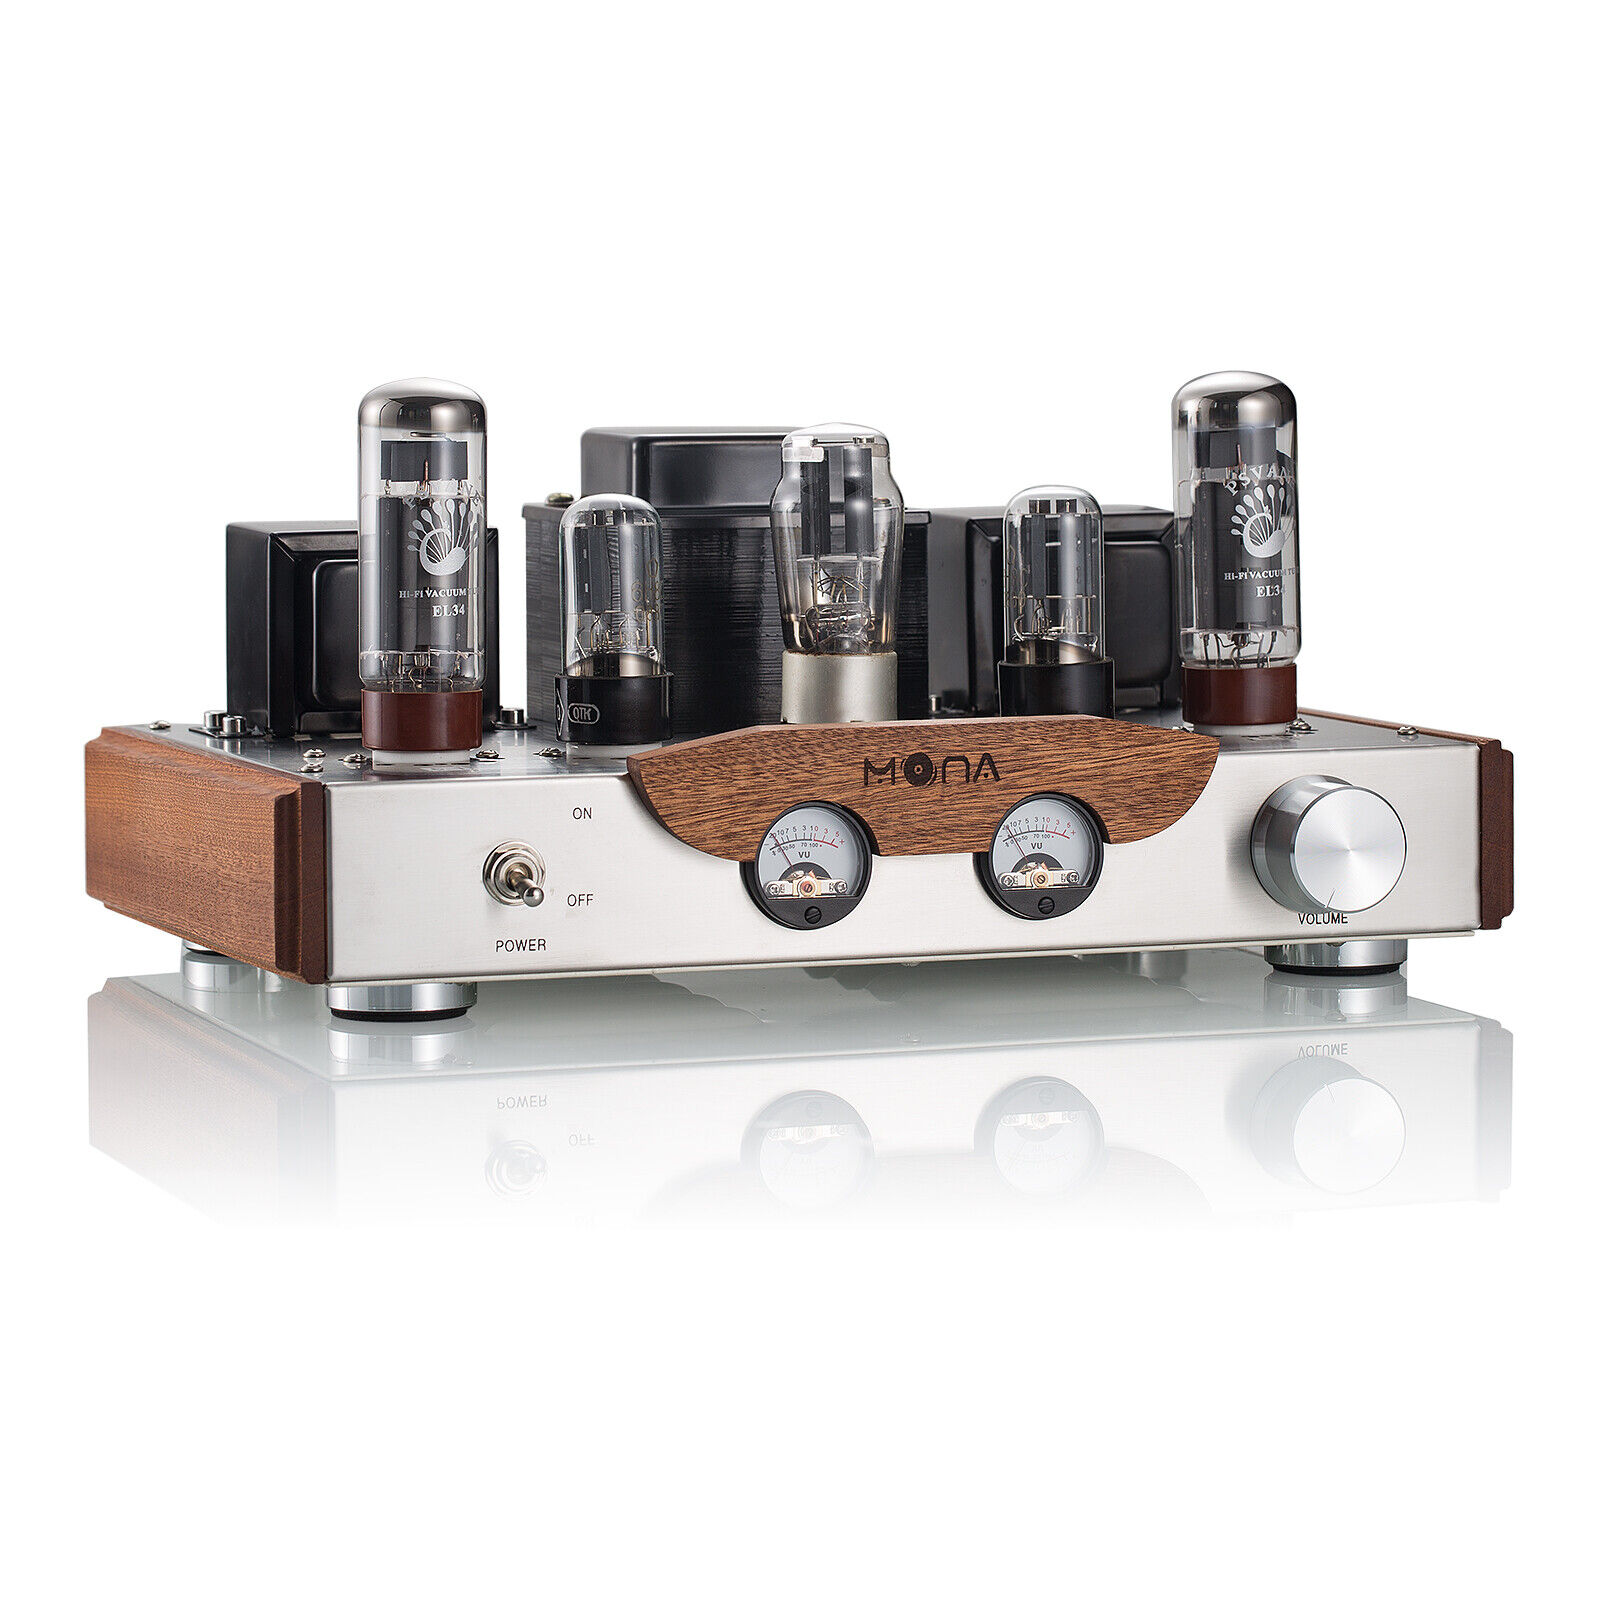 HiFi EL34 Vacuum Tube Amplifier Class A Single-ended Stereo Audio Power Amp 8W×2